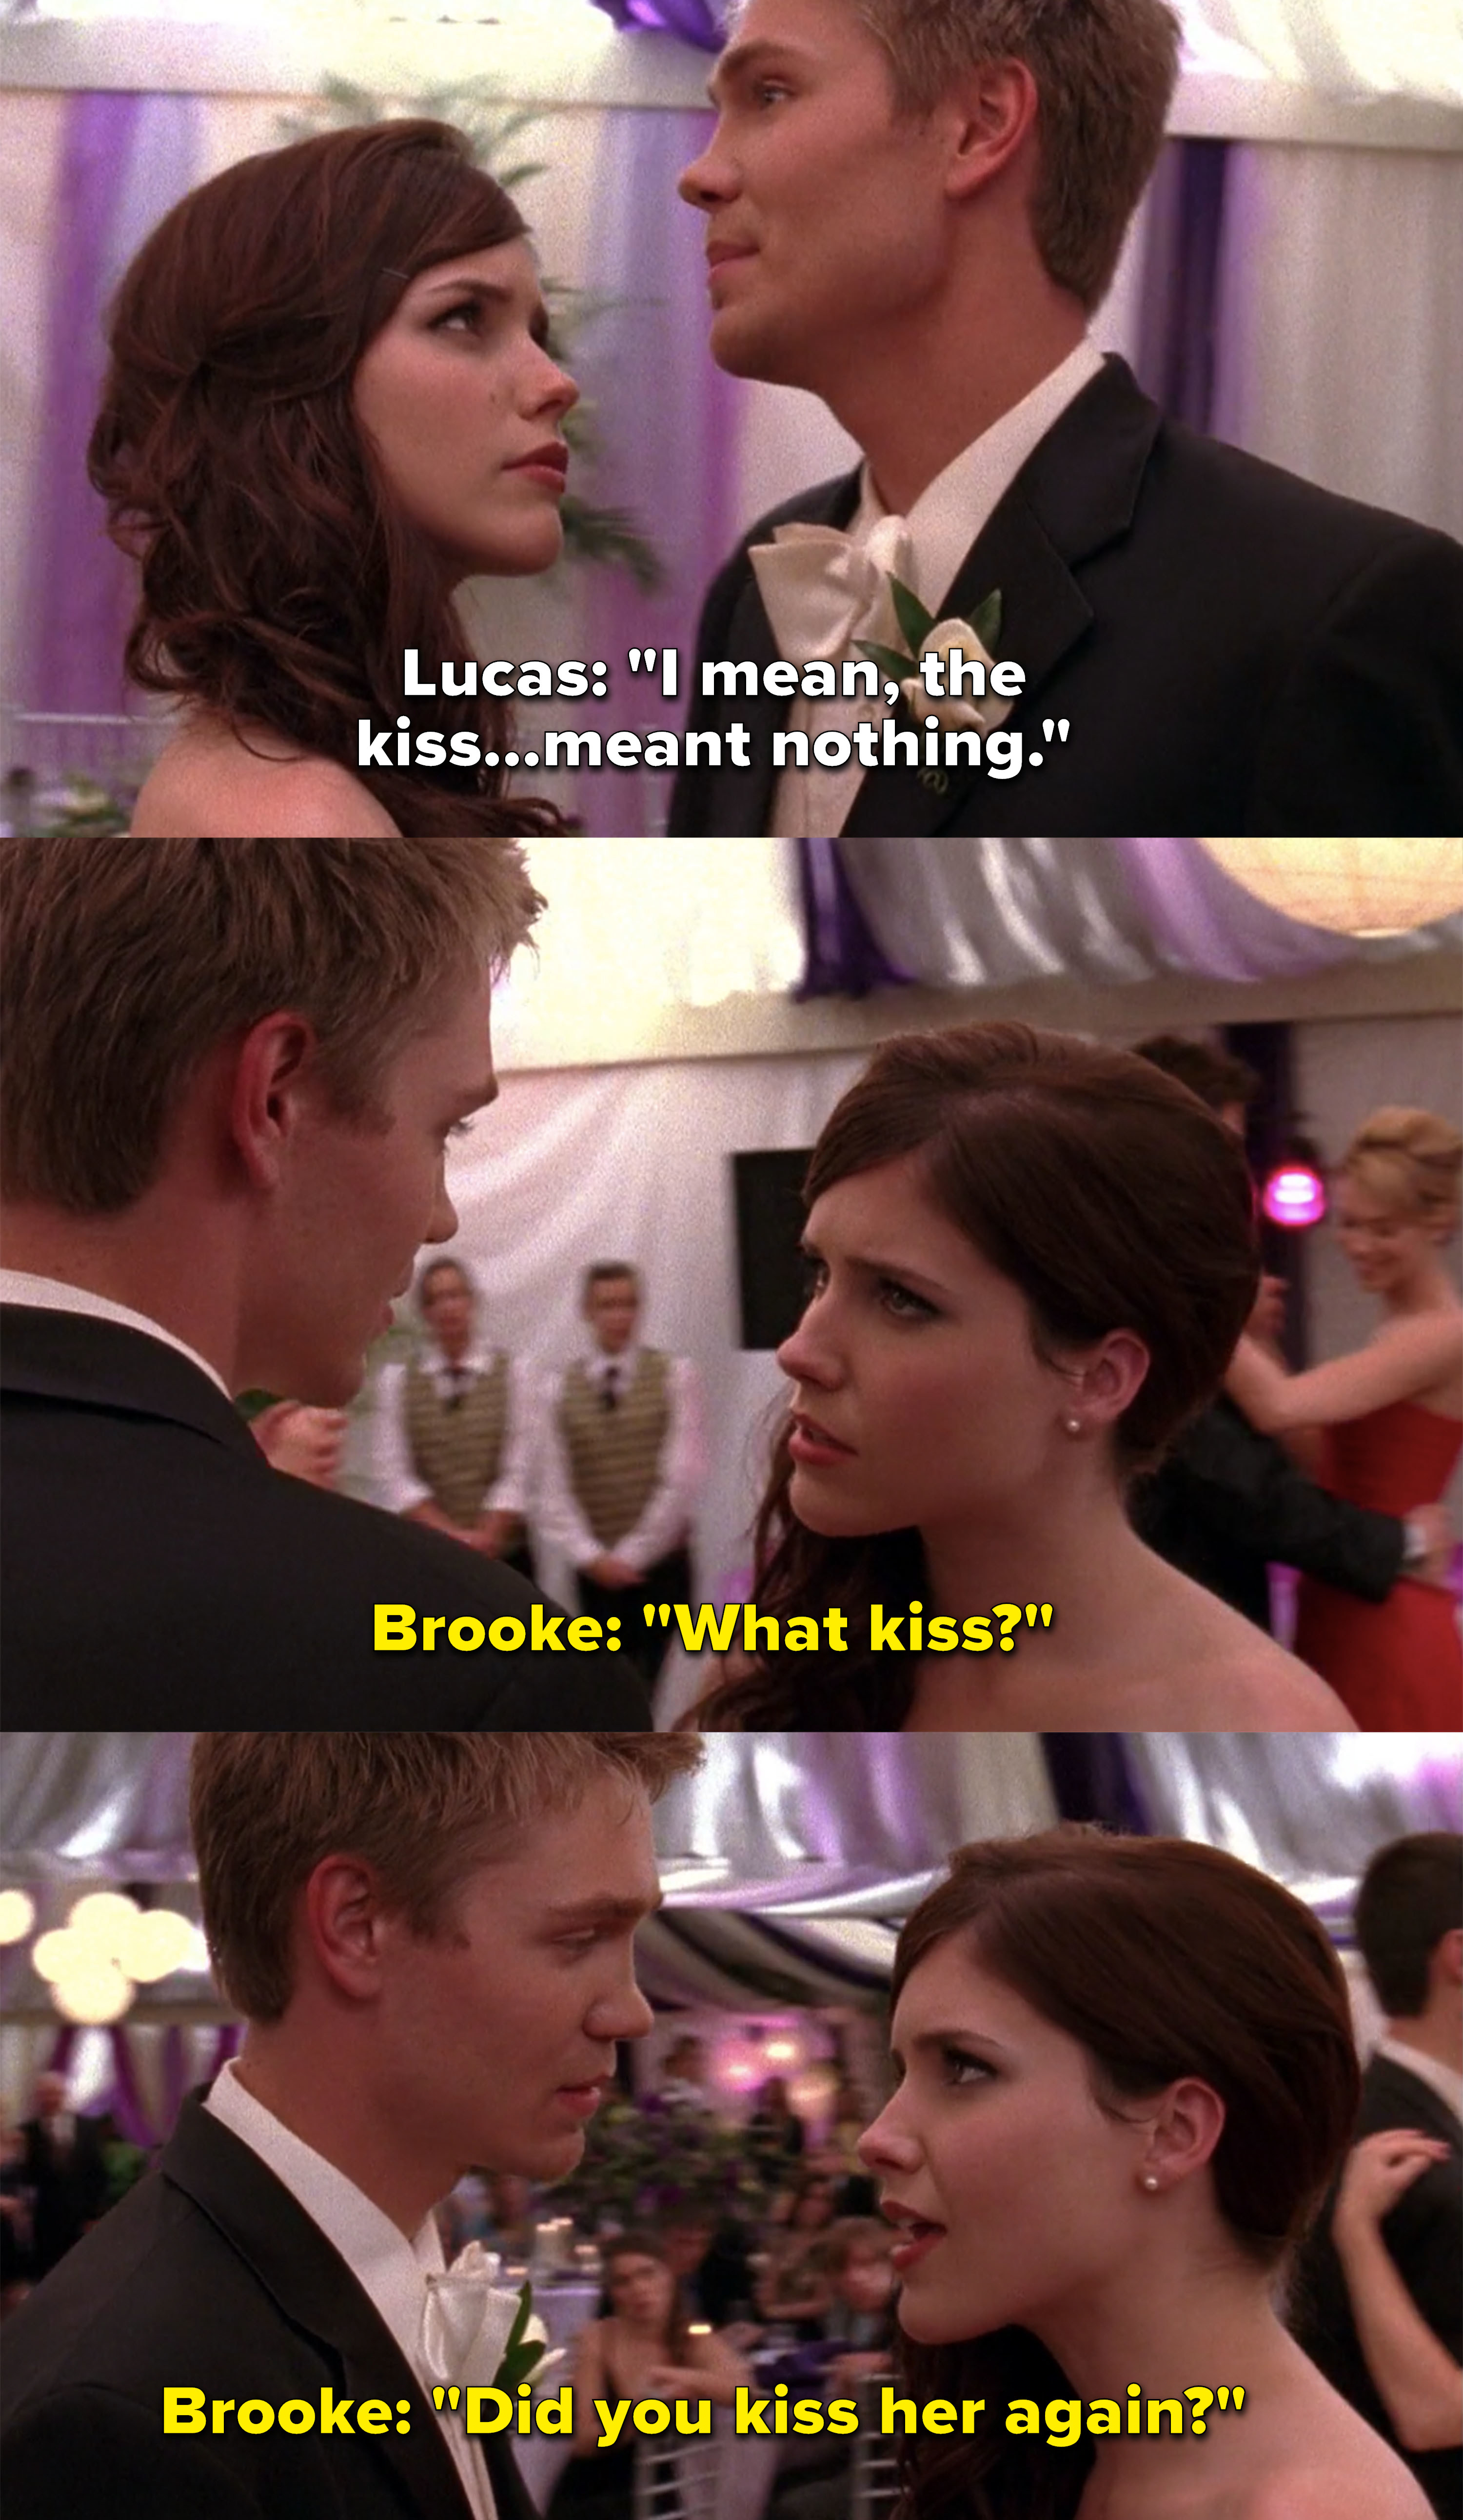 Lucas lets it slip that he and Peyton kissed again during the school shooting